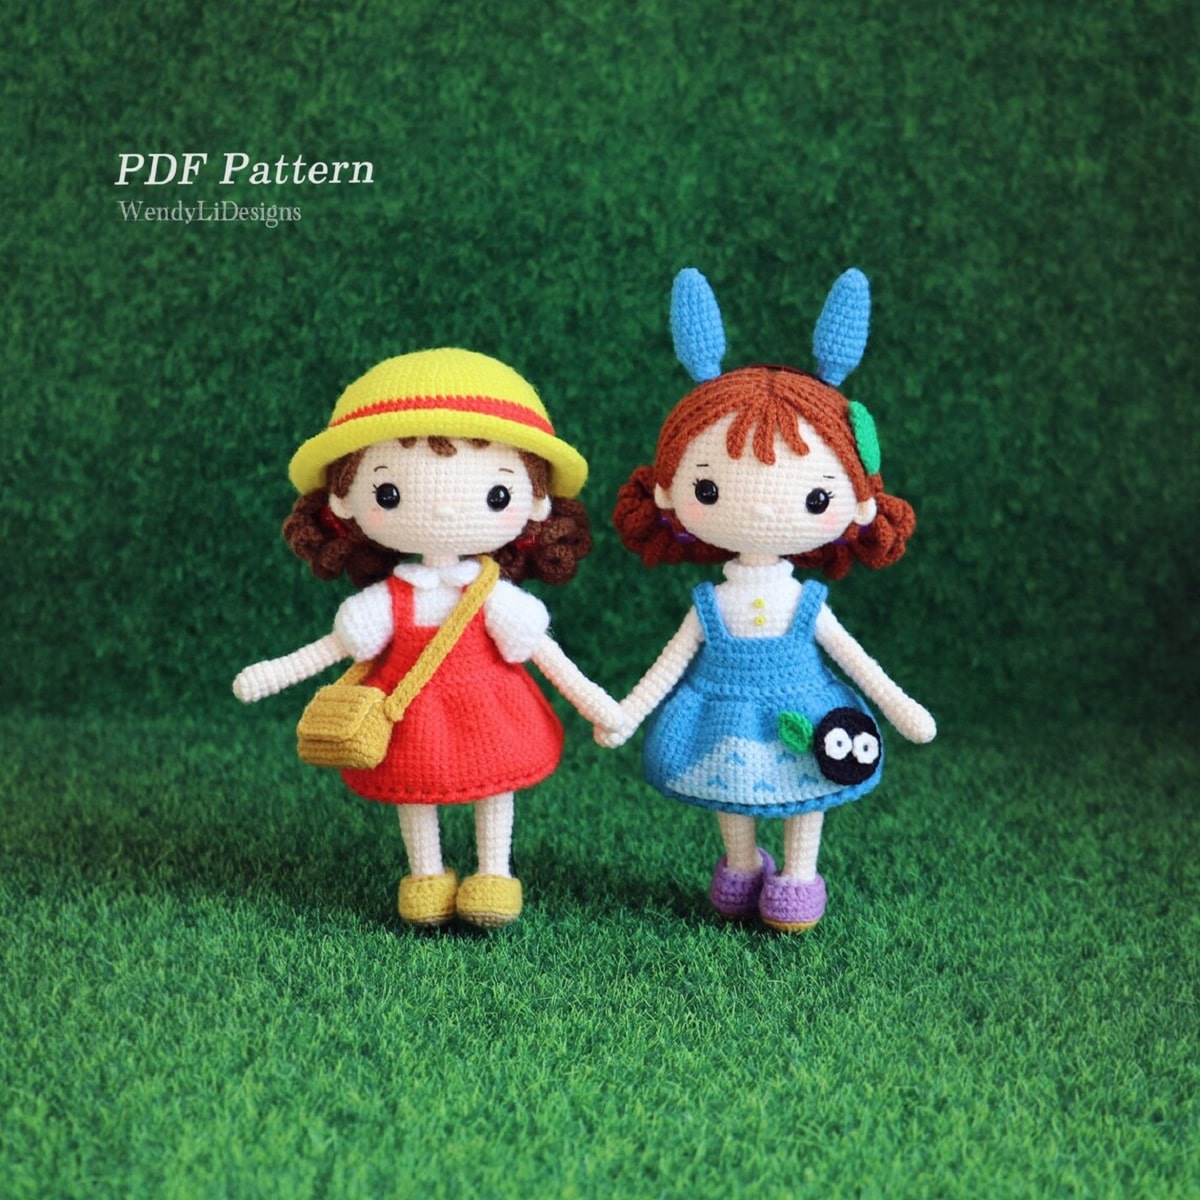 Crochet stuffed Mei and Satsuki wearing a red and blue dress holding hands on a green artificial grass background.